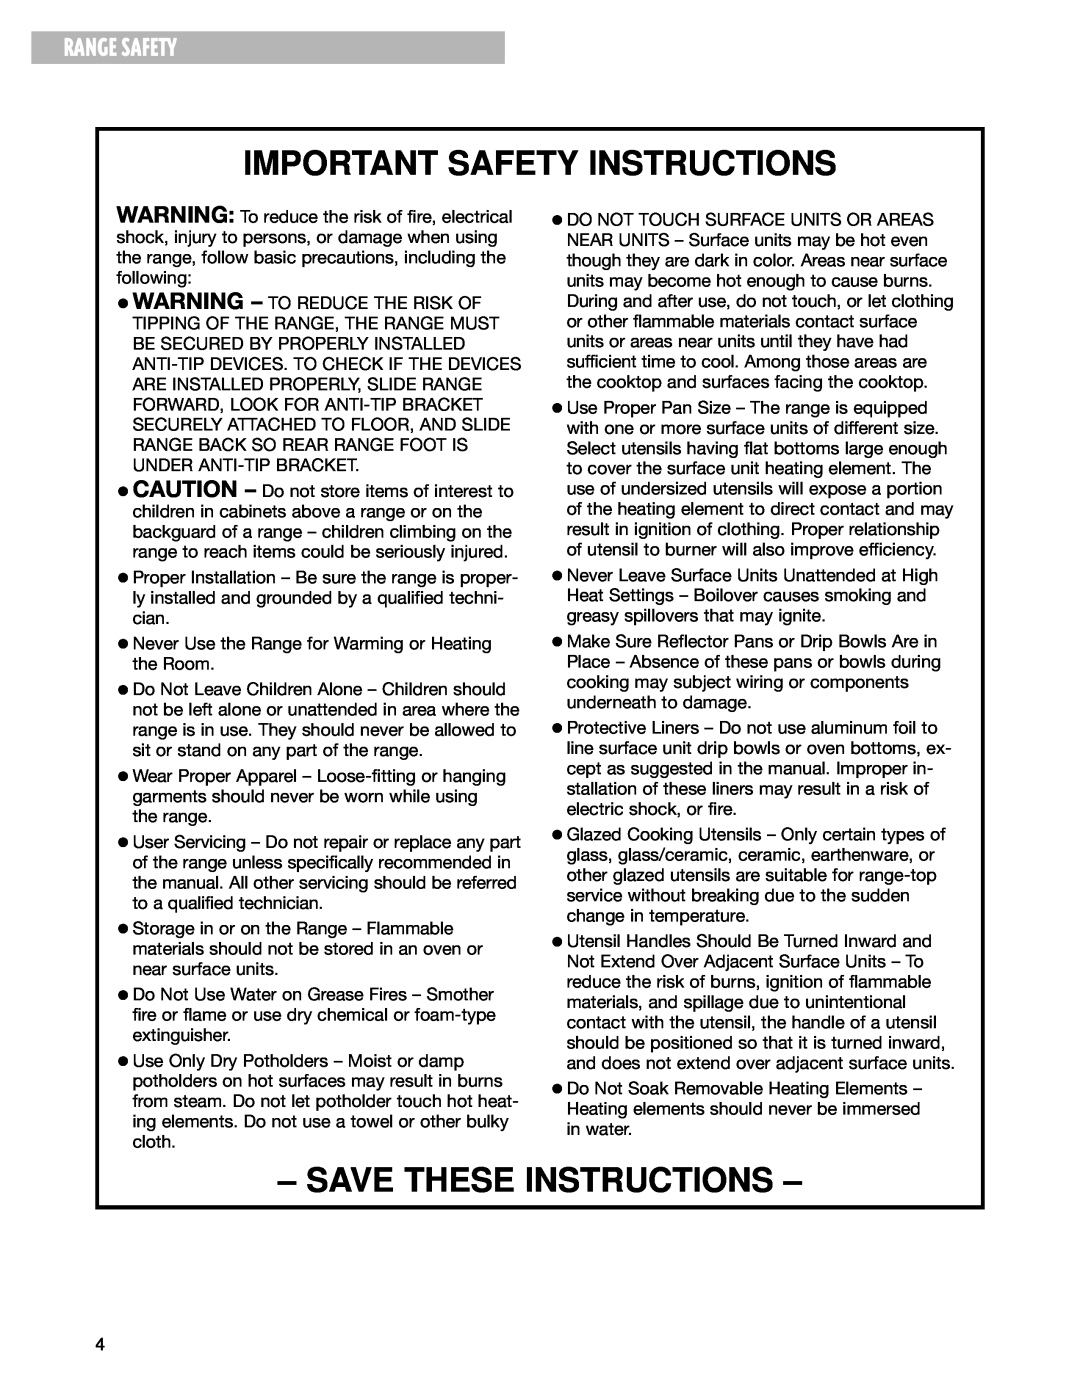 Whirlpool GR399LXG warranty Important Safety Instructions, Save These Instructions, Range Safety 